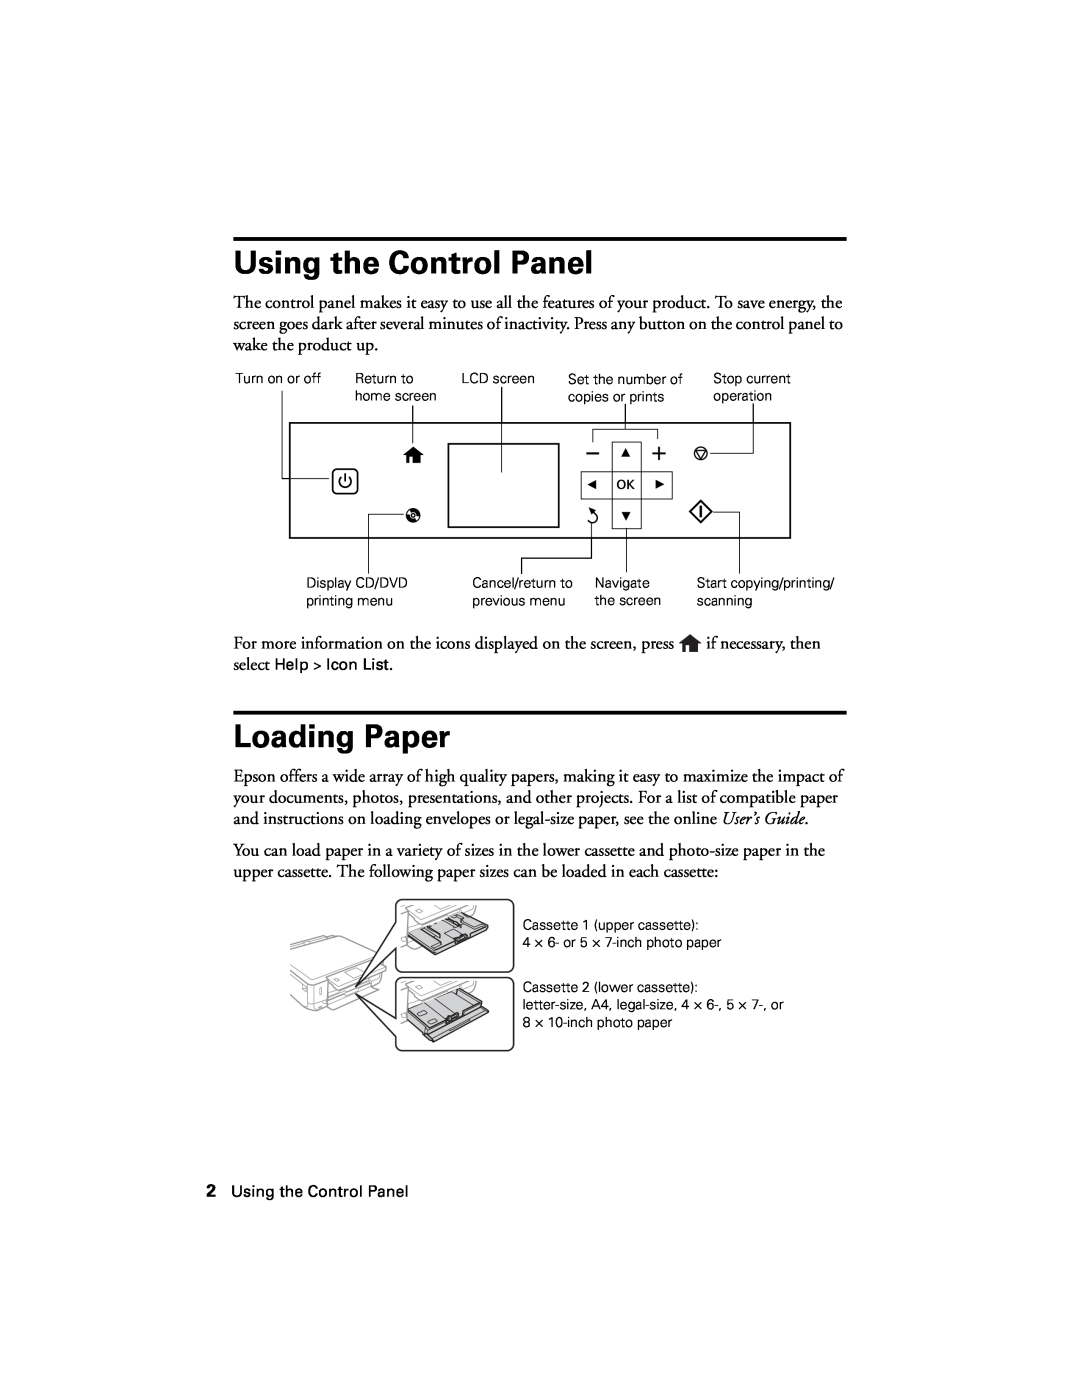 Epson XP-620 manual Using the Control Panel, Loading Paper 